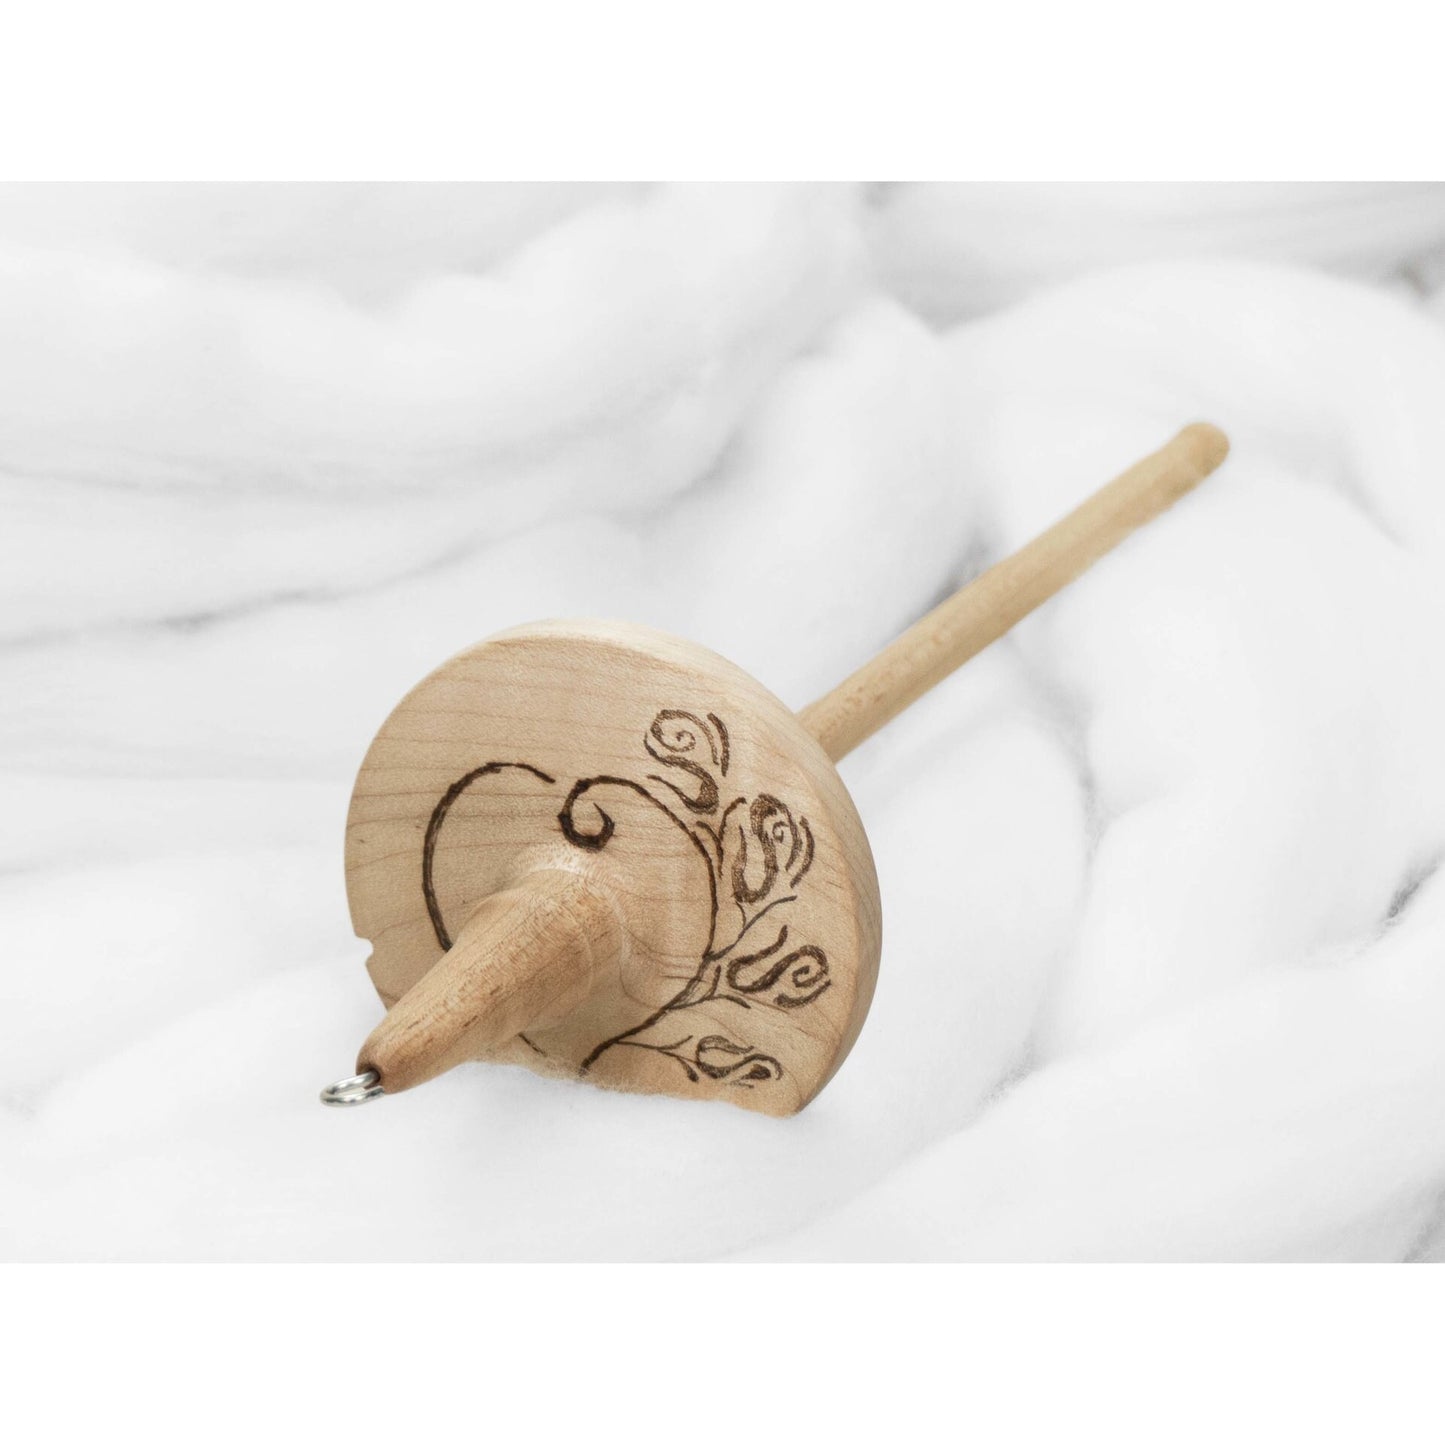 Rose Heart Stencil - Llampetia Hand-Turned Maple Wood Drop Spindle Heavyweight - Top Whorl 45 Grams